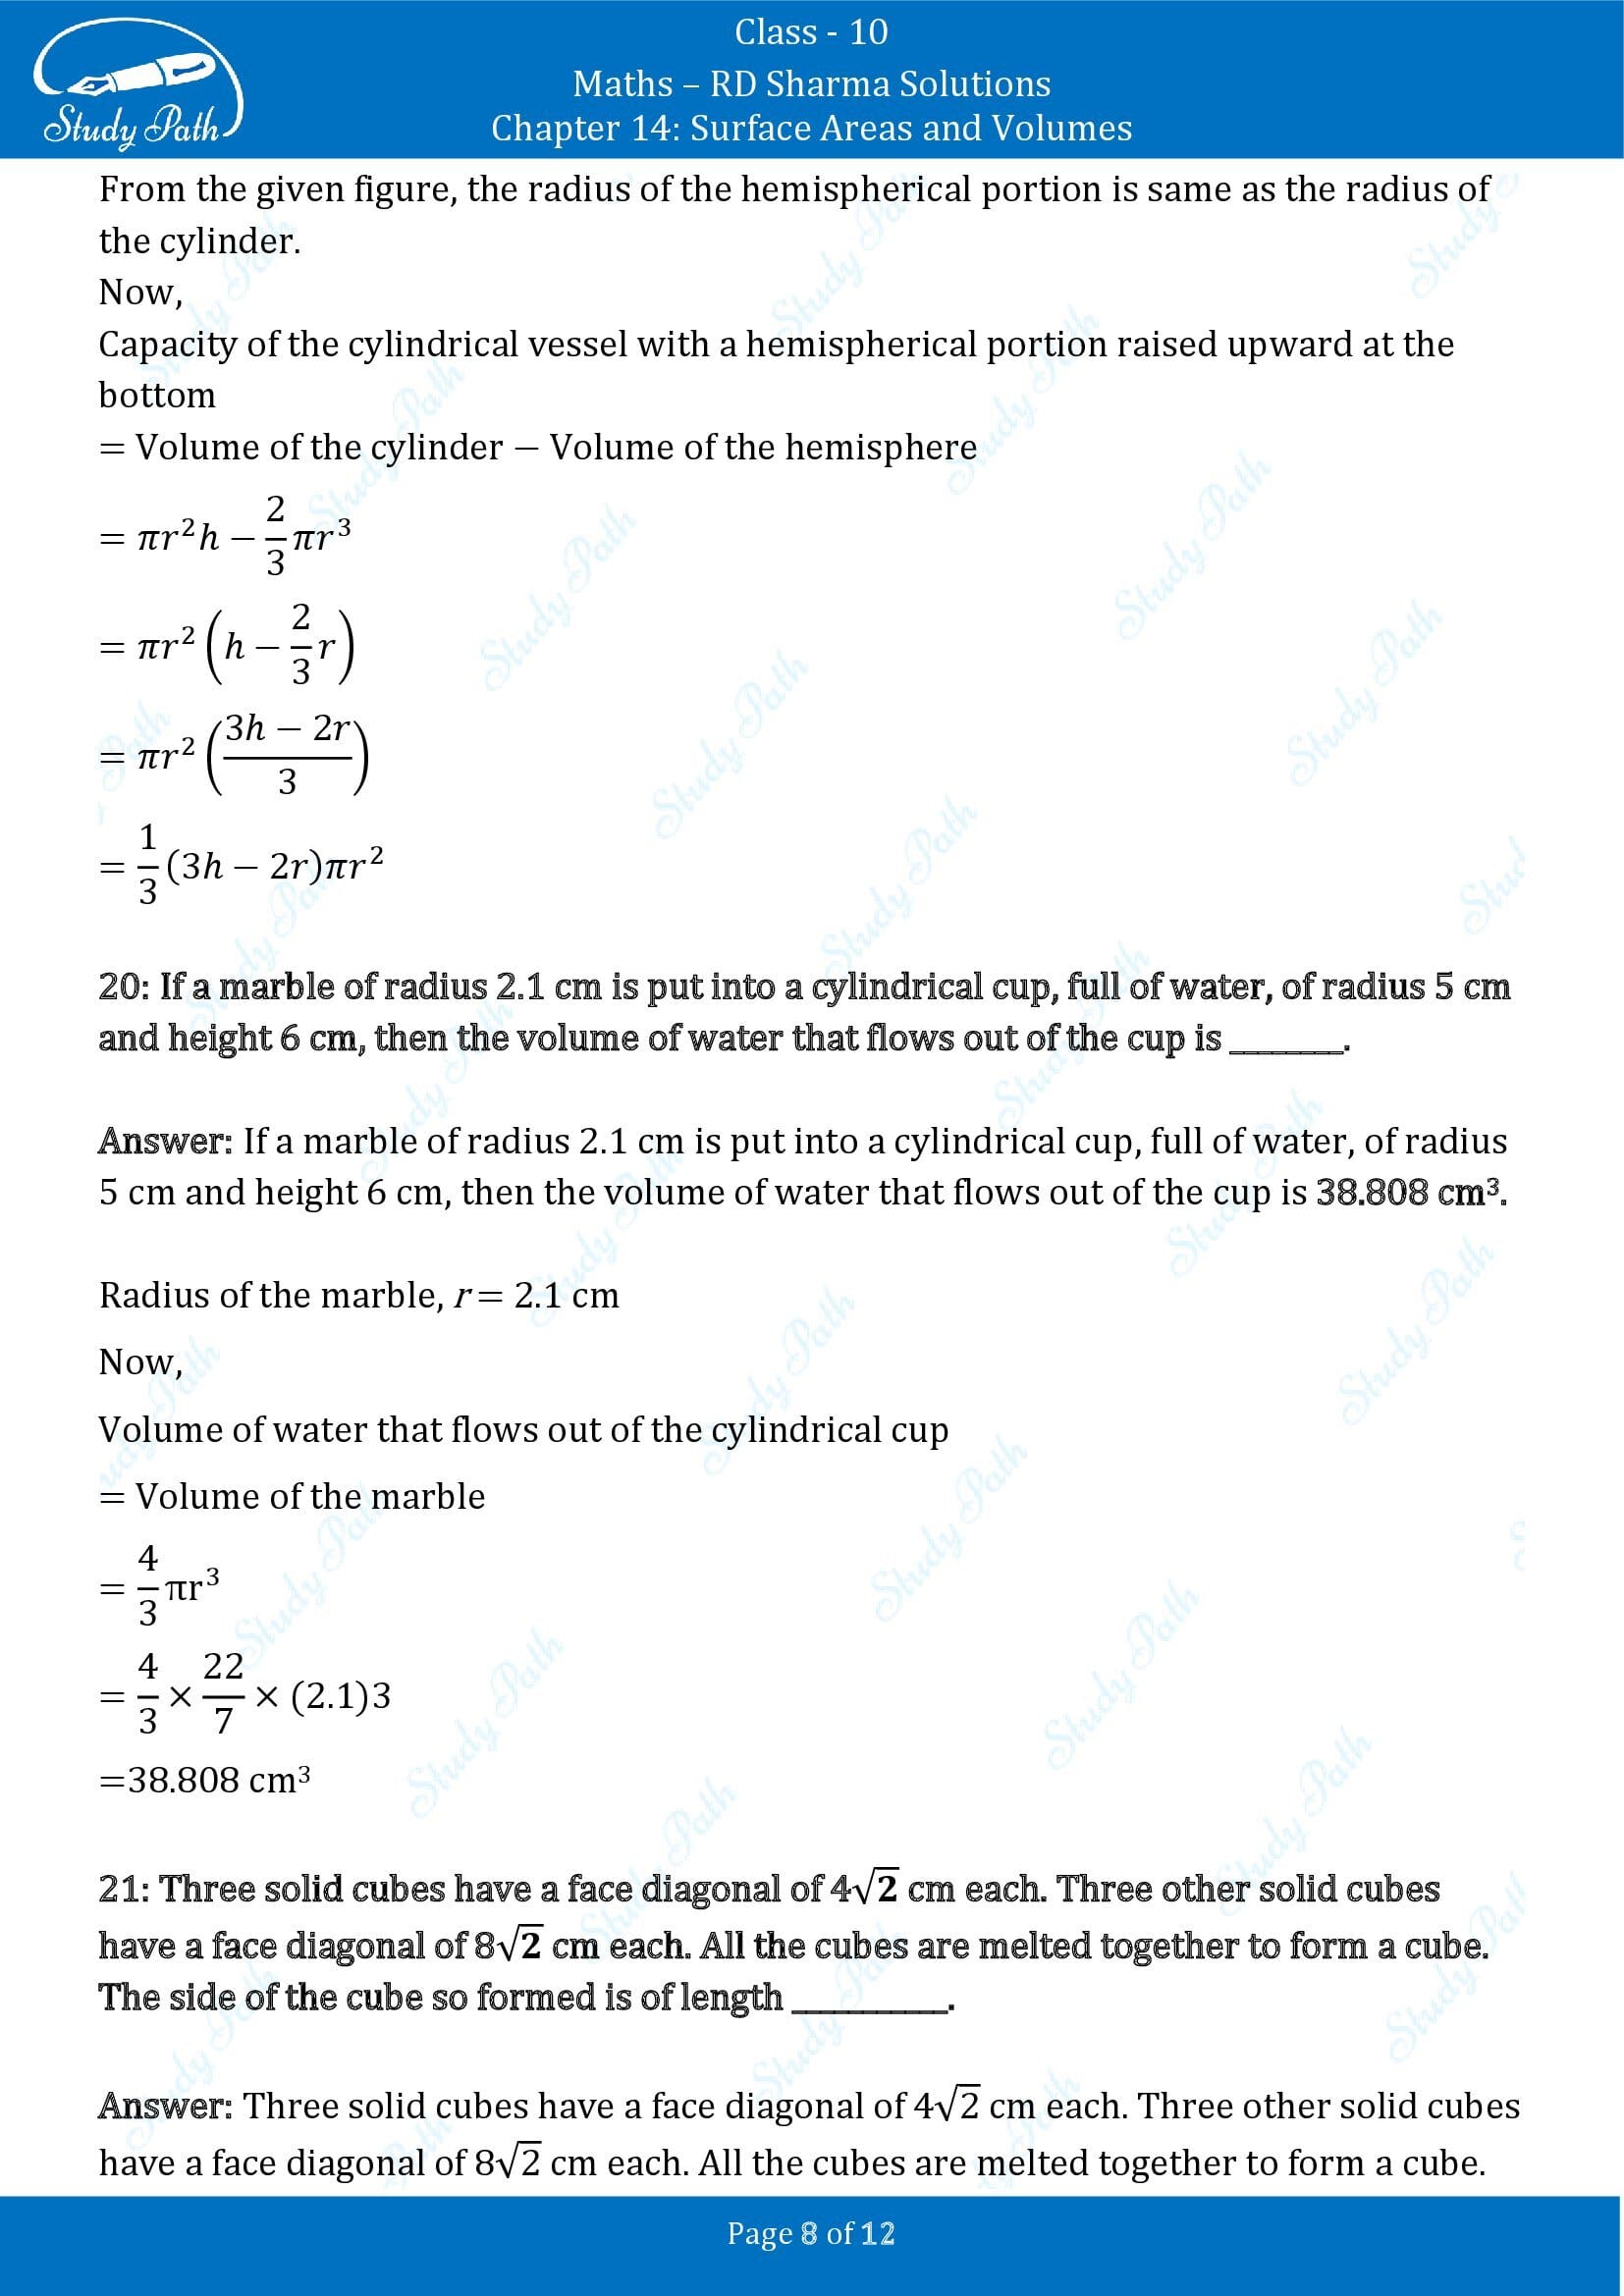 RD Sharma Solutions Class 10 Chapter 14 Surface Areas and Volumes Fill in the Blank Type Questions FBQs 00008